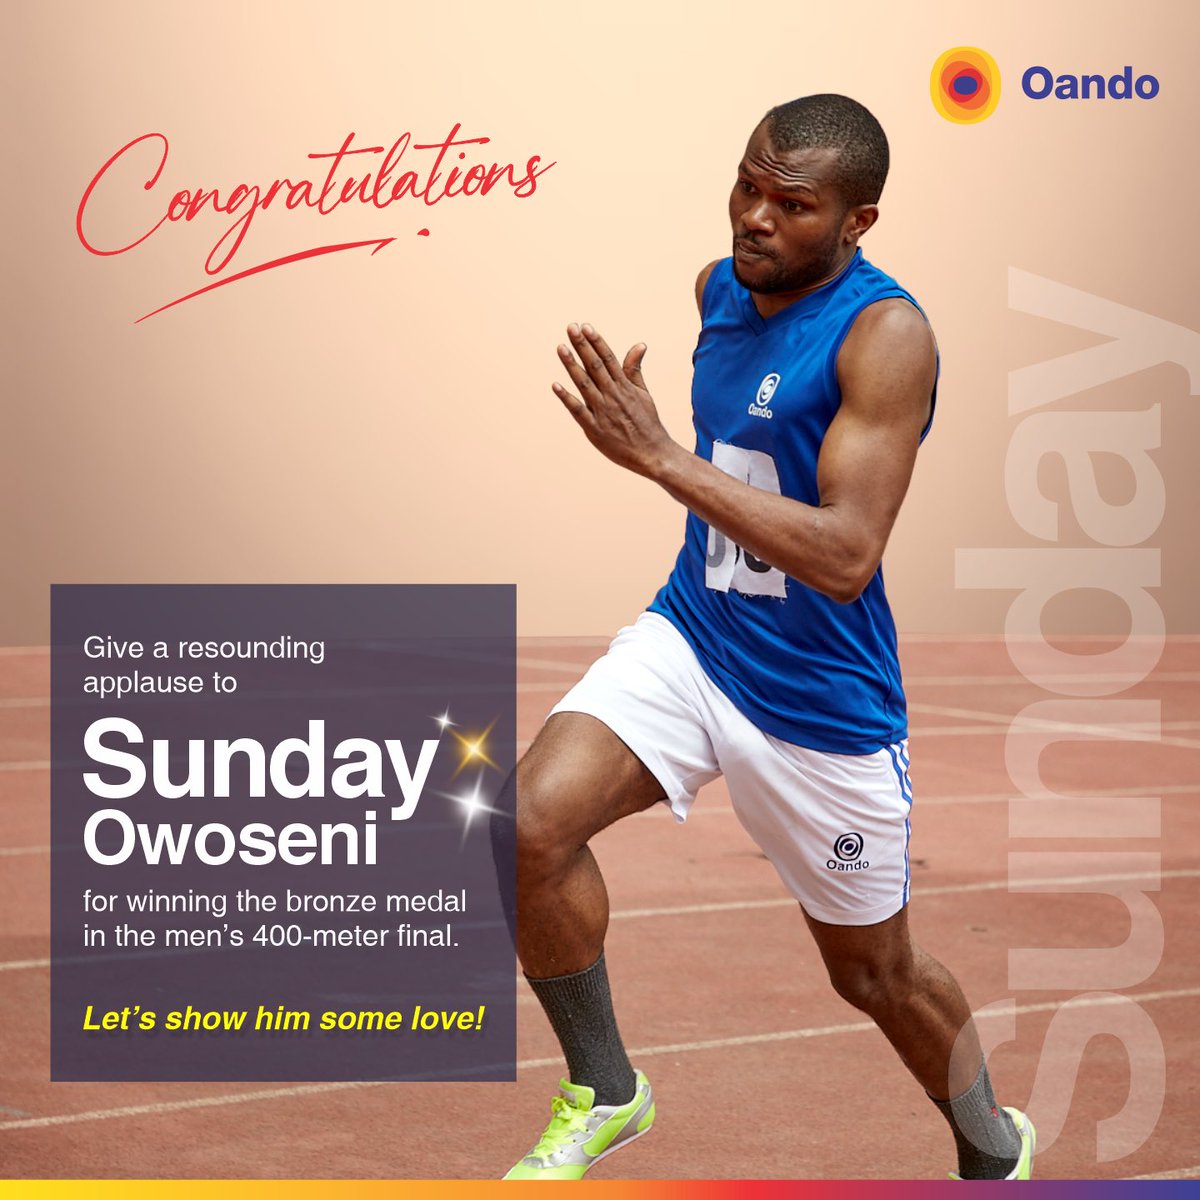 The 19th edition of NOGIG has come to a close, but the Oando team made their mark, and it’s time to celebrate our second medalist! Congratulations to Sunday Owoseni for a stellar performance in the Men's 400-meter Final! 🥉🏃‍♂️🎉 #RaceChampion #NOGIG #BronzeMedalWinner